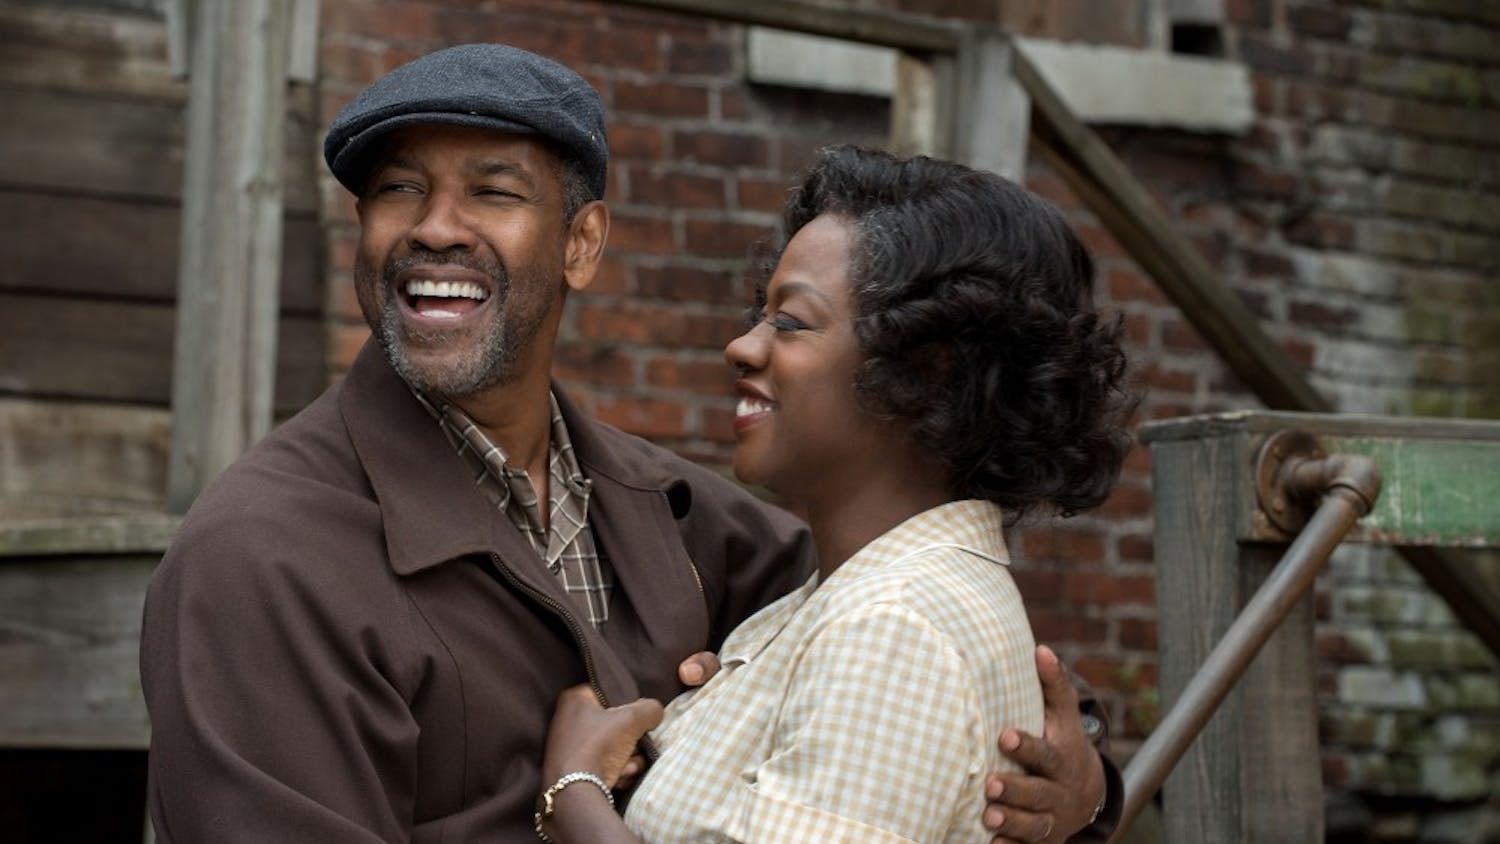 Denzel Washington as Troy Maxson and Viola Davis as Rose Maxson in a scene from the movie "Fences" from Paramount Pictures. (David Lee/Paramount Pictures/TNS